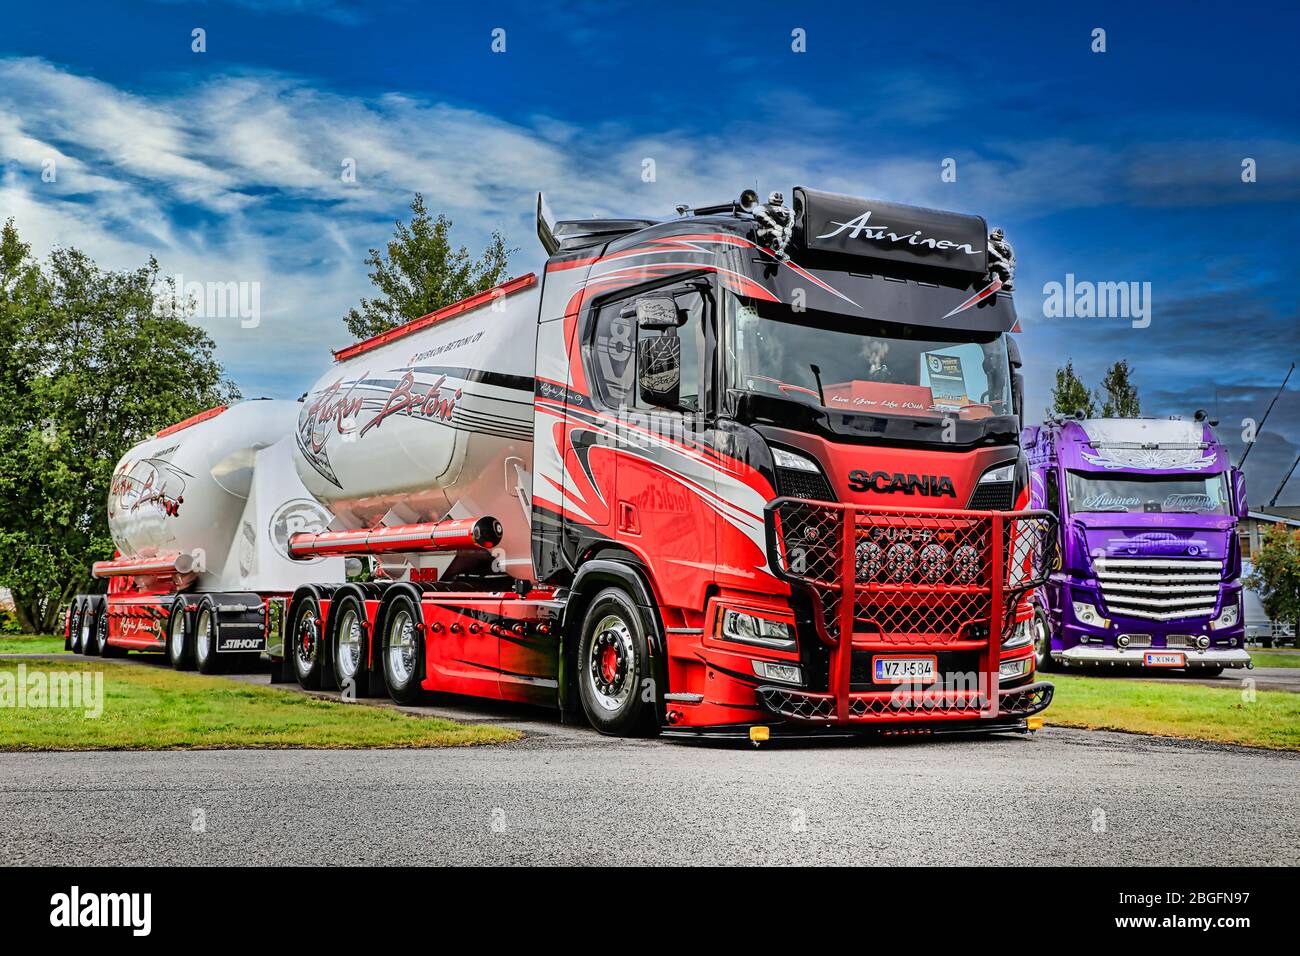 Scania Group - Scania 560 S with the Super powertrain